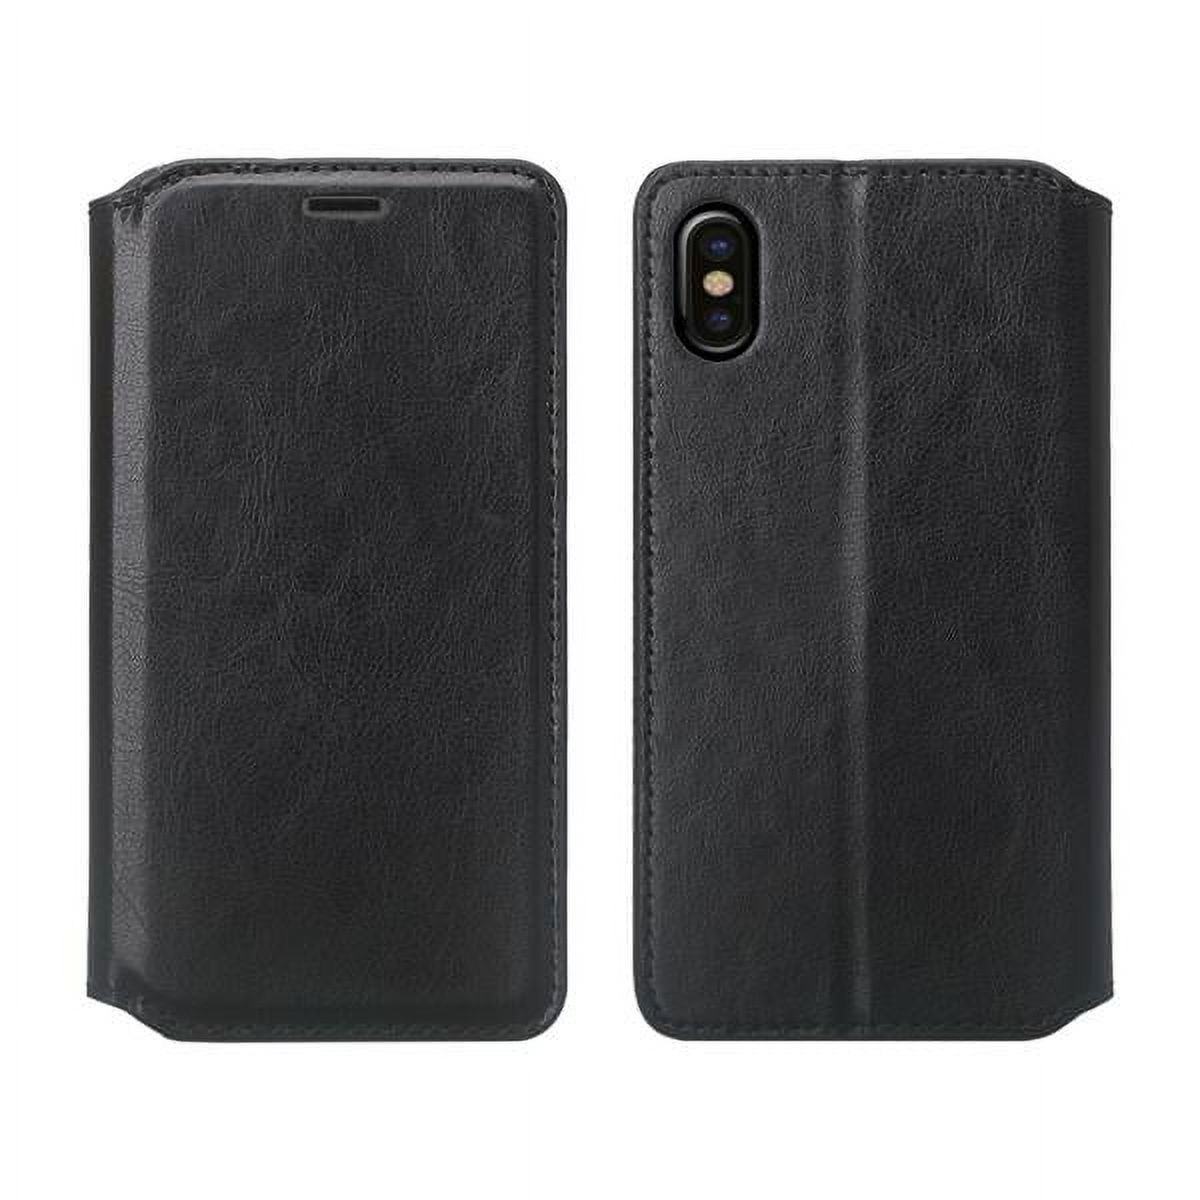 Apple iPhone Xs Max Case, Leather Wallet Case Kickstand Phone Case for iPhone Xs Max 2018 - Black - image 2 of 3